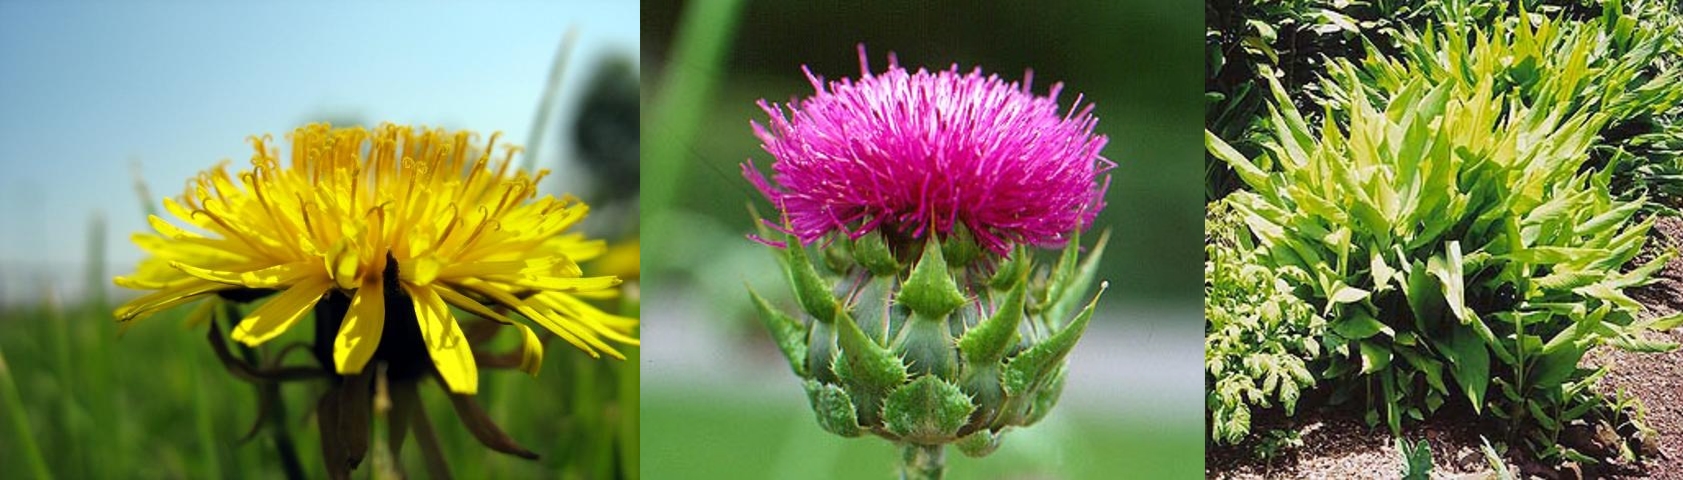 Popular liver-support herbs include (L-R) dandelion, milk thistle and turmeric.